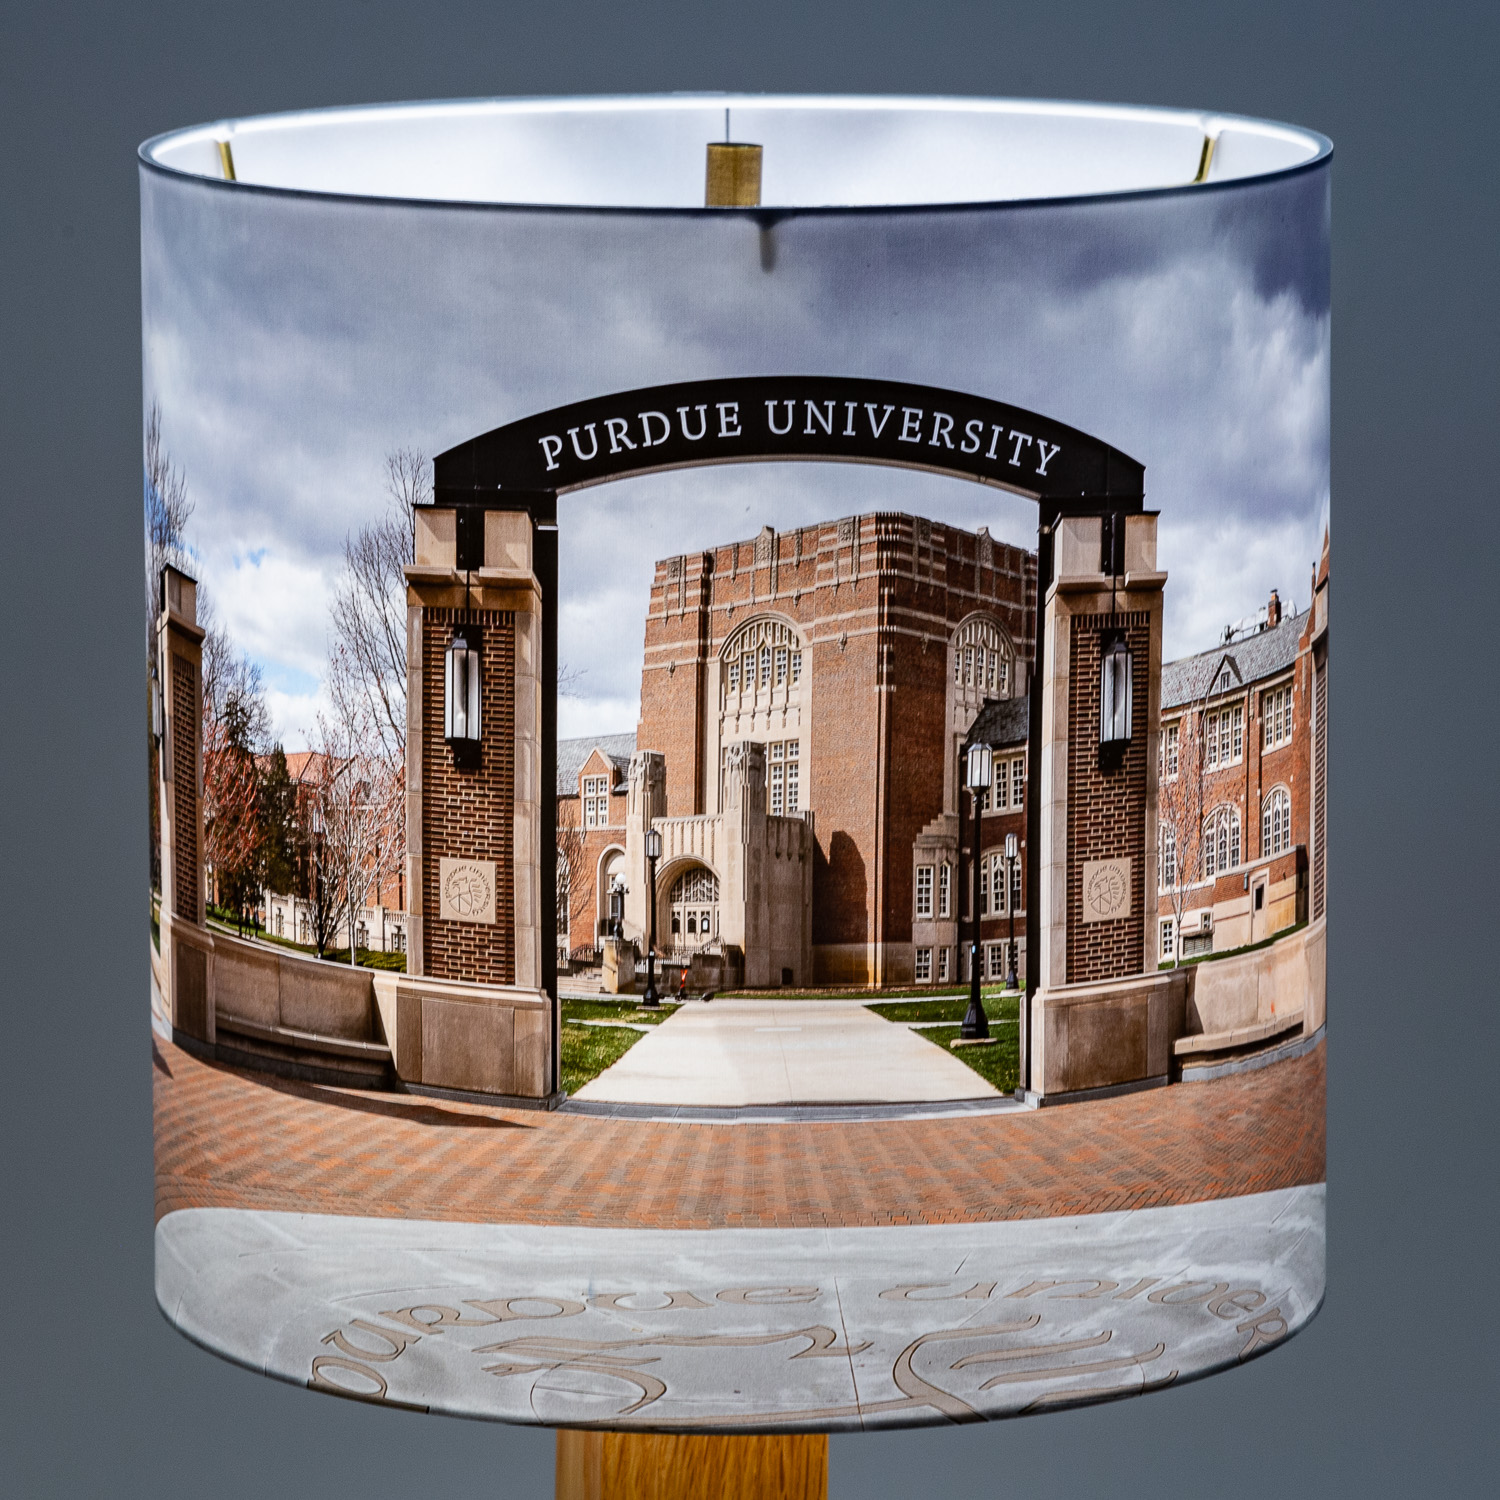 122: Purdue University gateway arch and Memorial Union -- Photo on Lamp shade by David Elmore